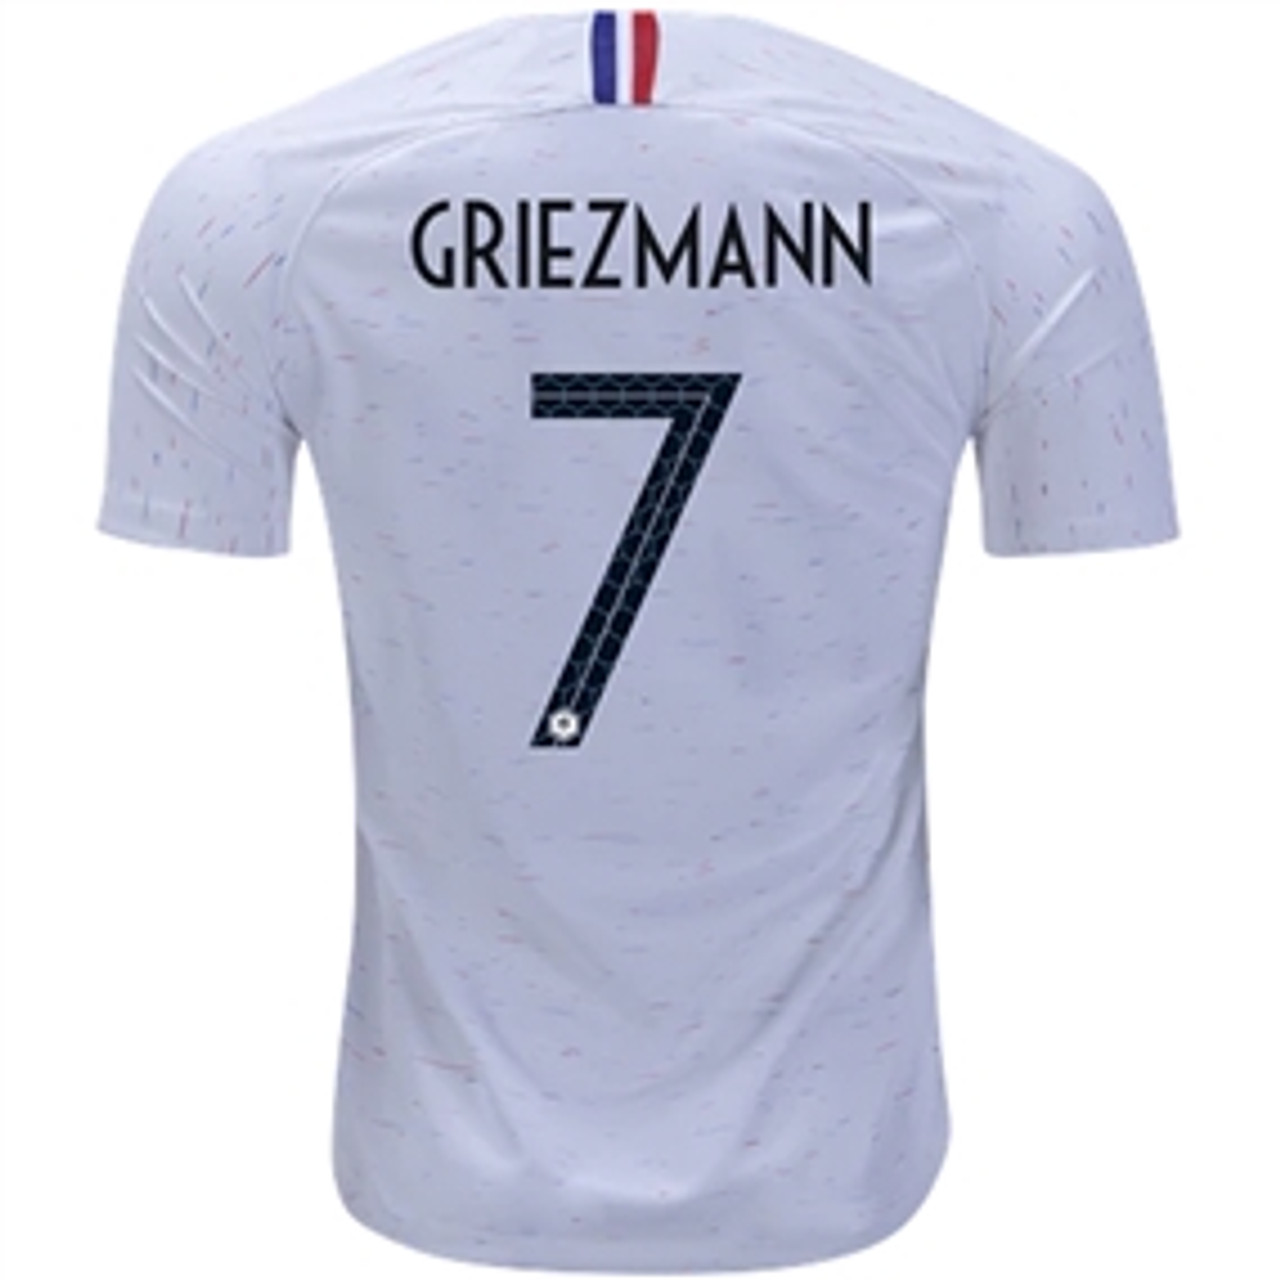 jersey france world cup 2018